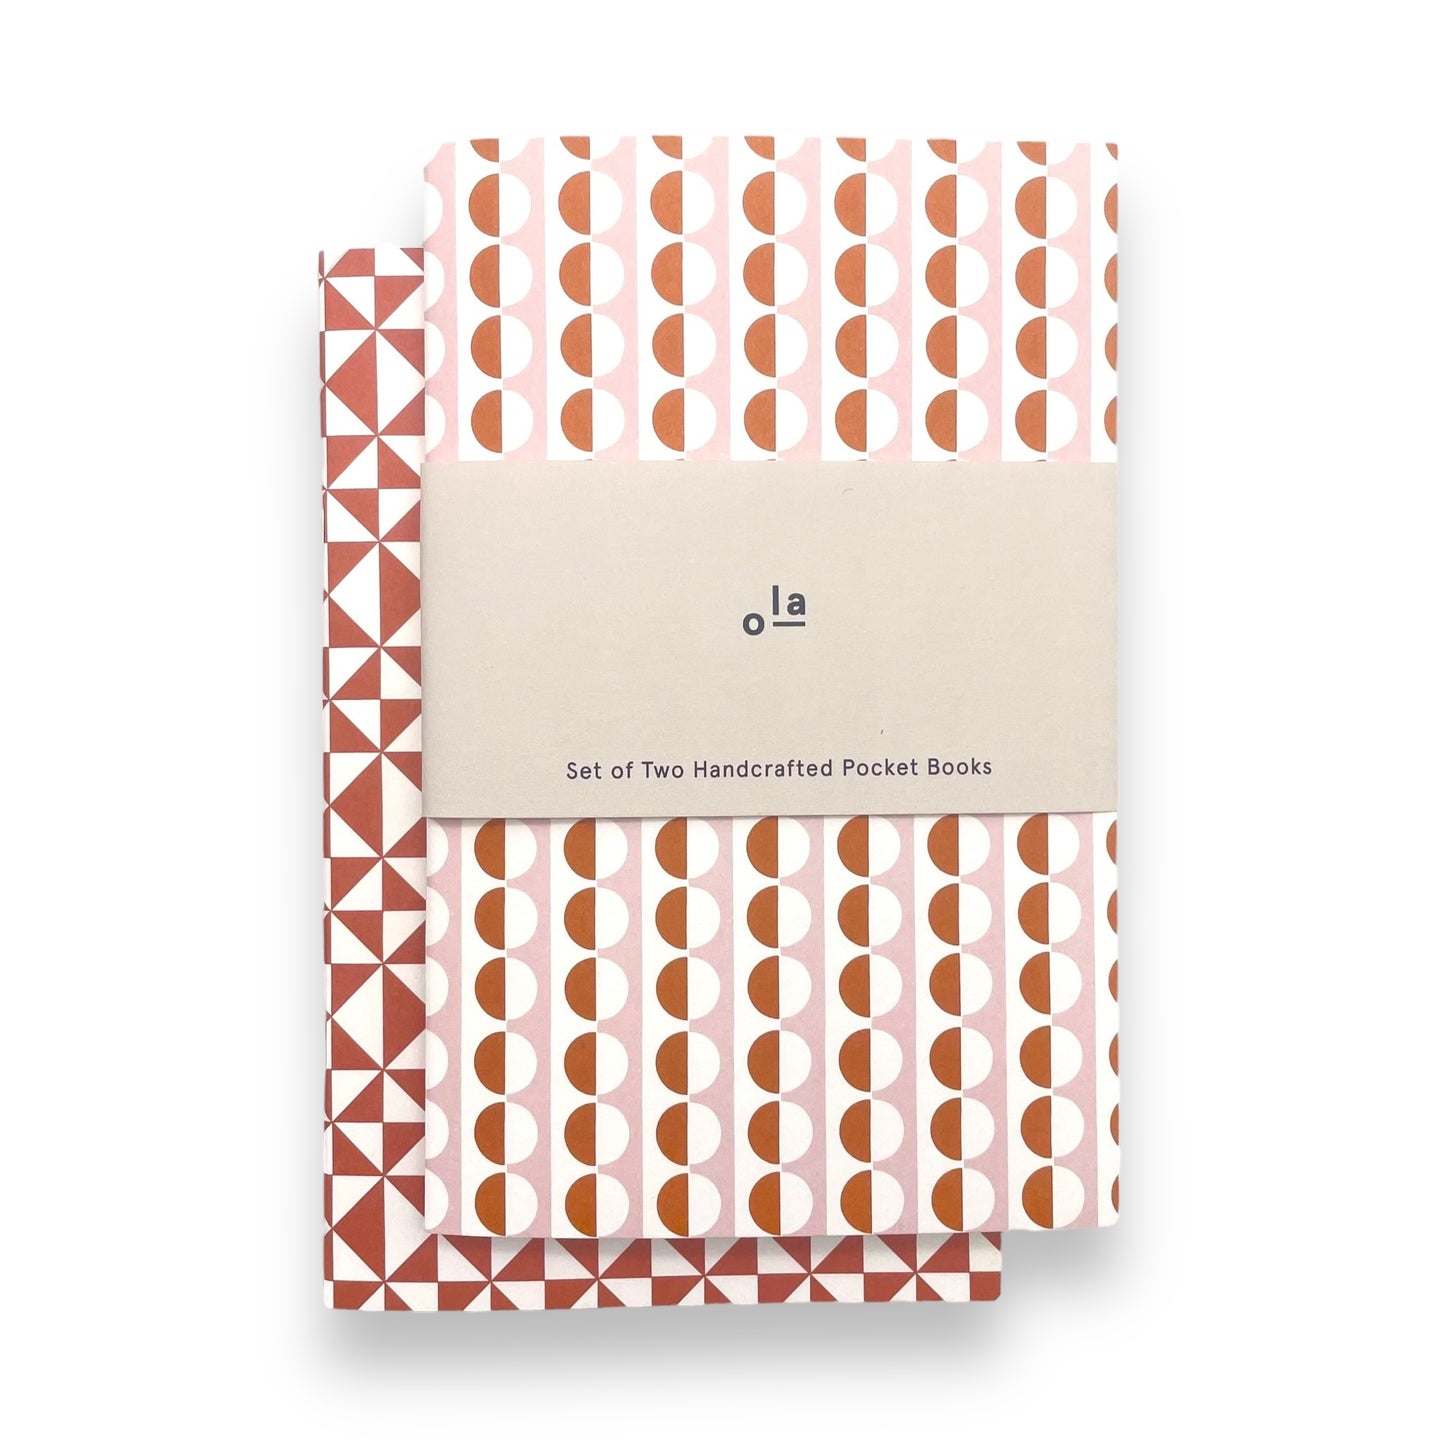 A set of two softcover pocket notebooks by Ola Studio. Two different cover design, one is a circle geometric in pick and orange, the other a triangular geometry in brick red. Pictured with branded band